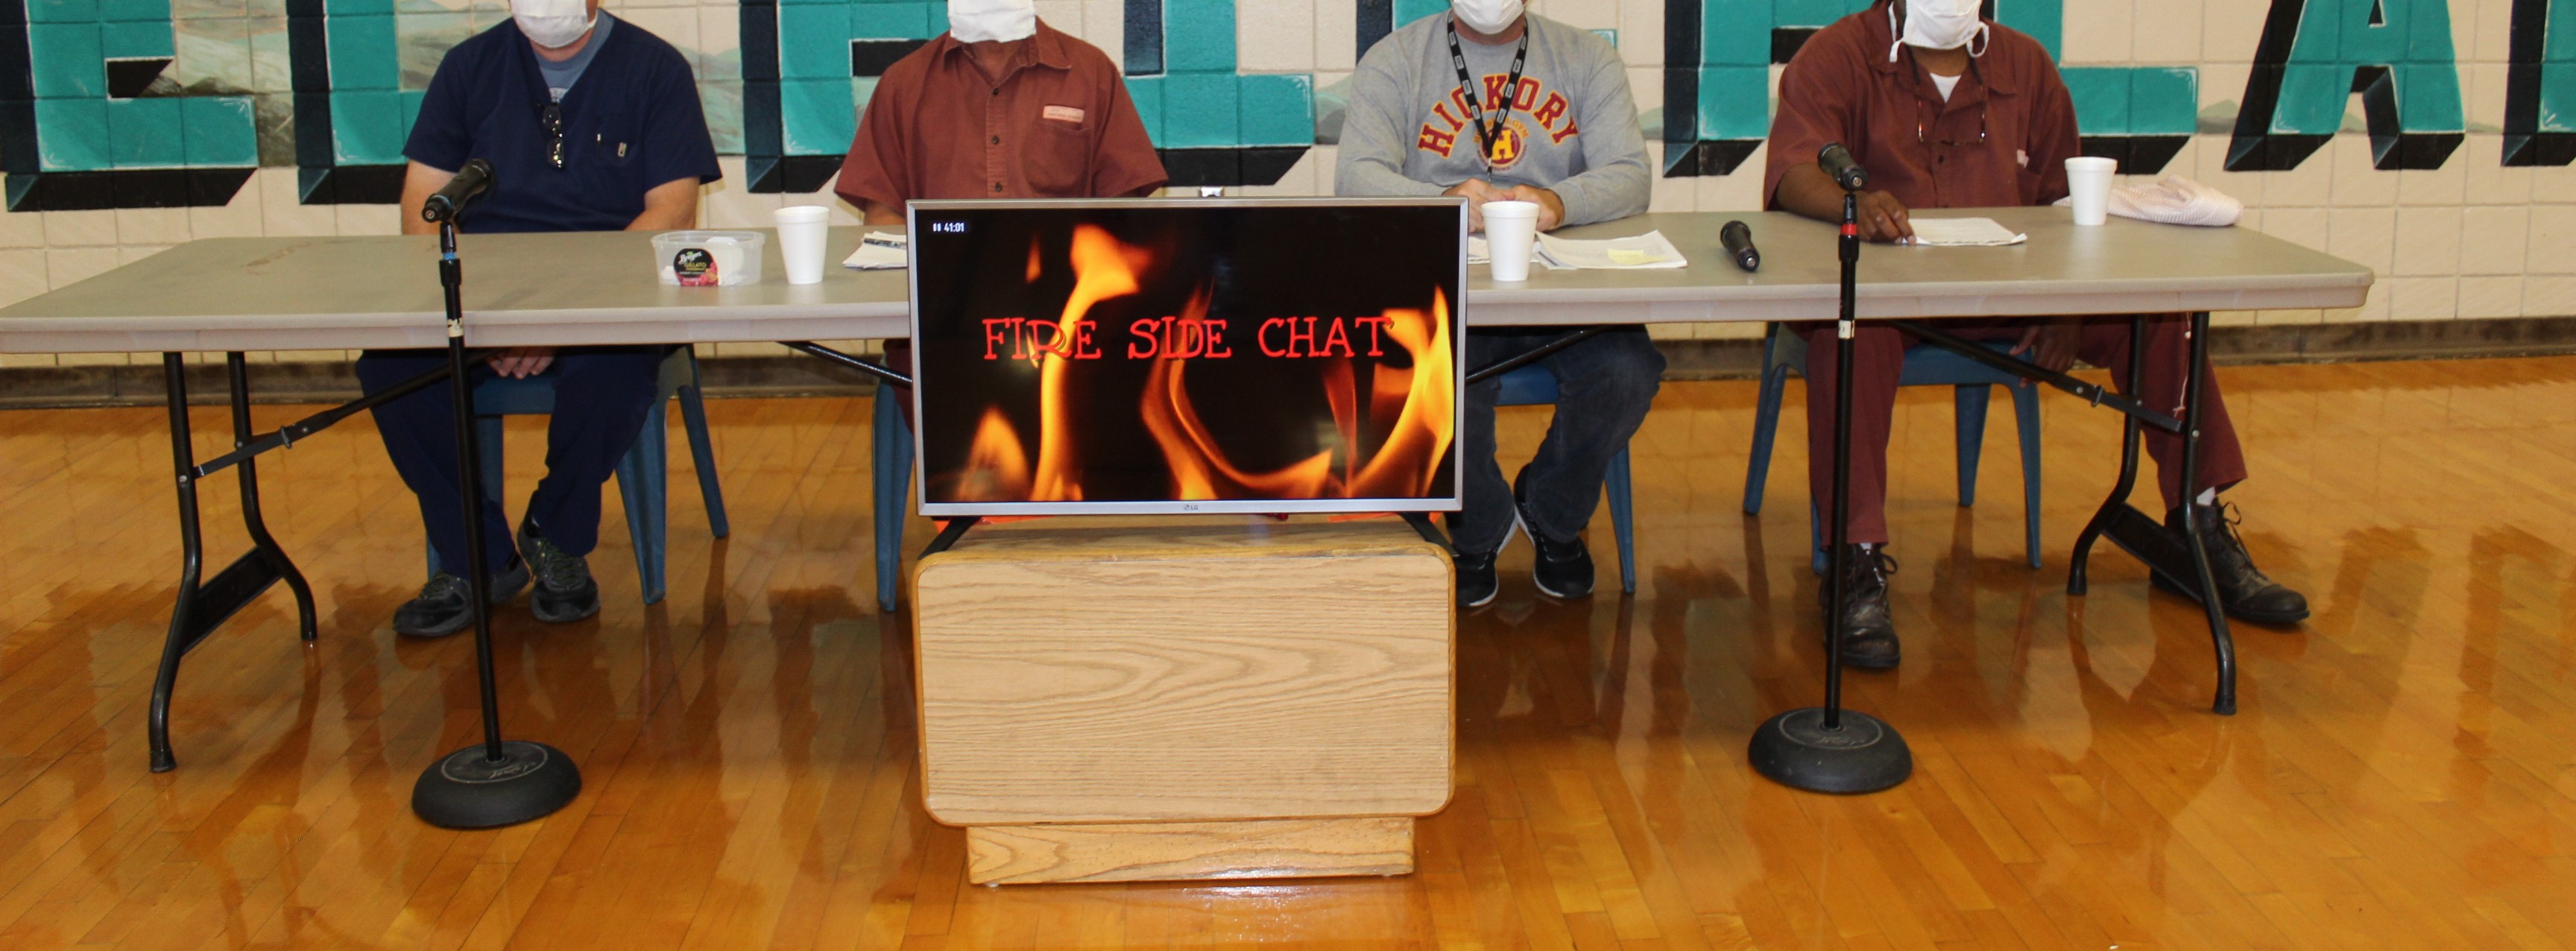 A panel sits for a Fireside Chat